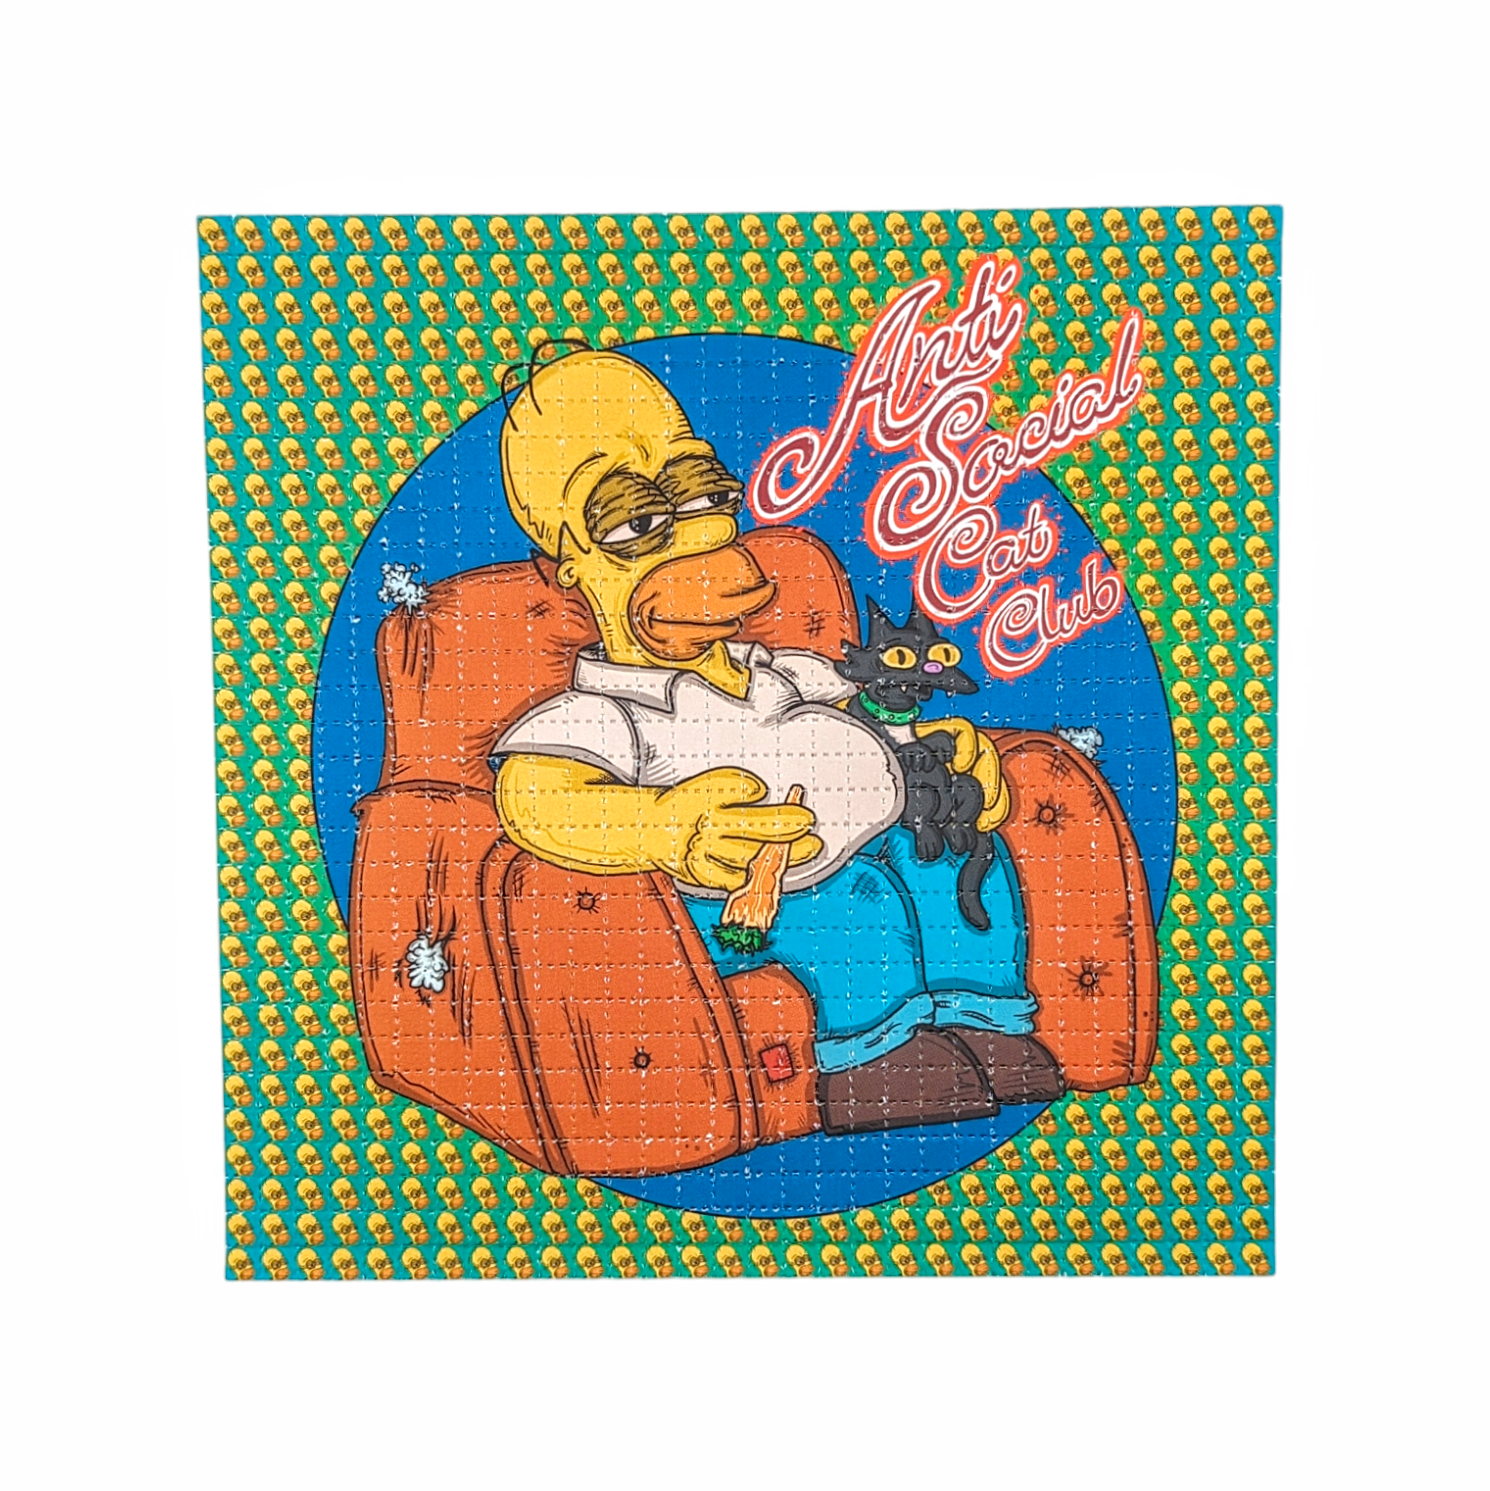 Vincent Gordon Anti Social Cat Club (Homer), 2024 Archival Pigment Print on Perforated Blotter Paper 7.75 x 7.75 in Edition of 100  Hand Signed + Numbered by the artist. Perforated and published by Zane Kesey in Pleasant Hill, OR.